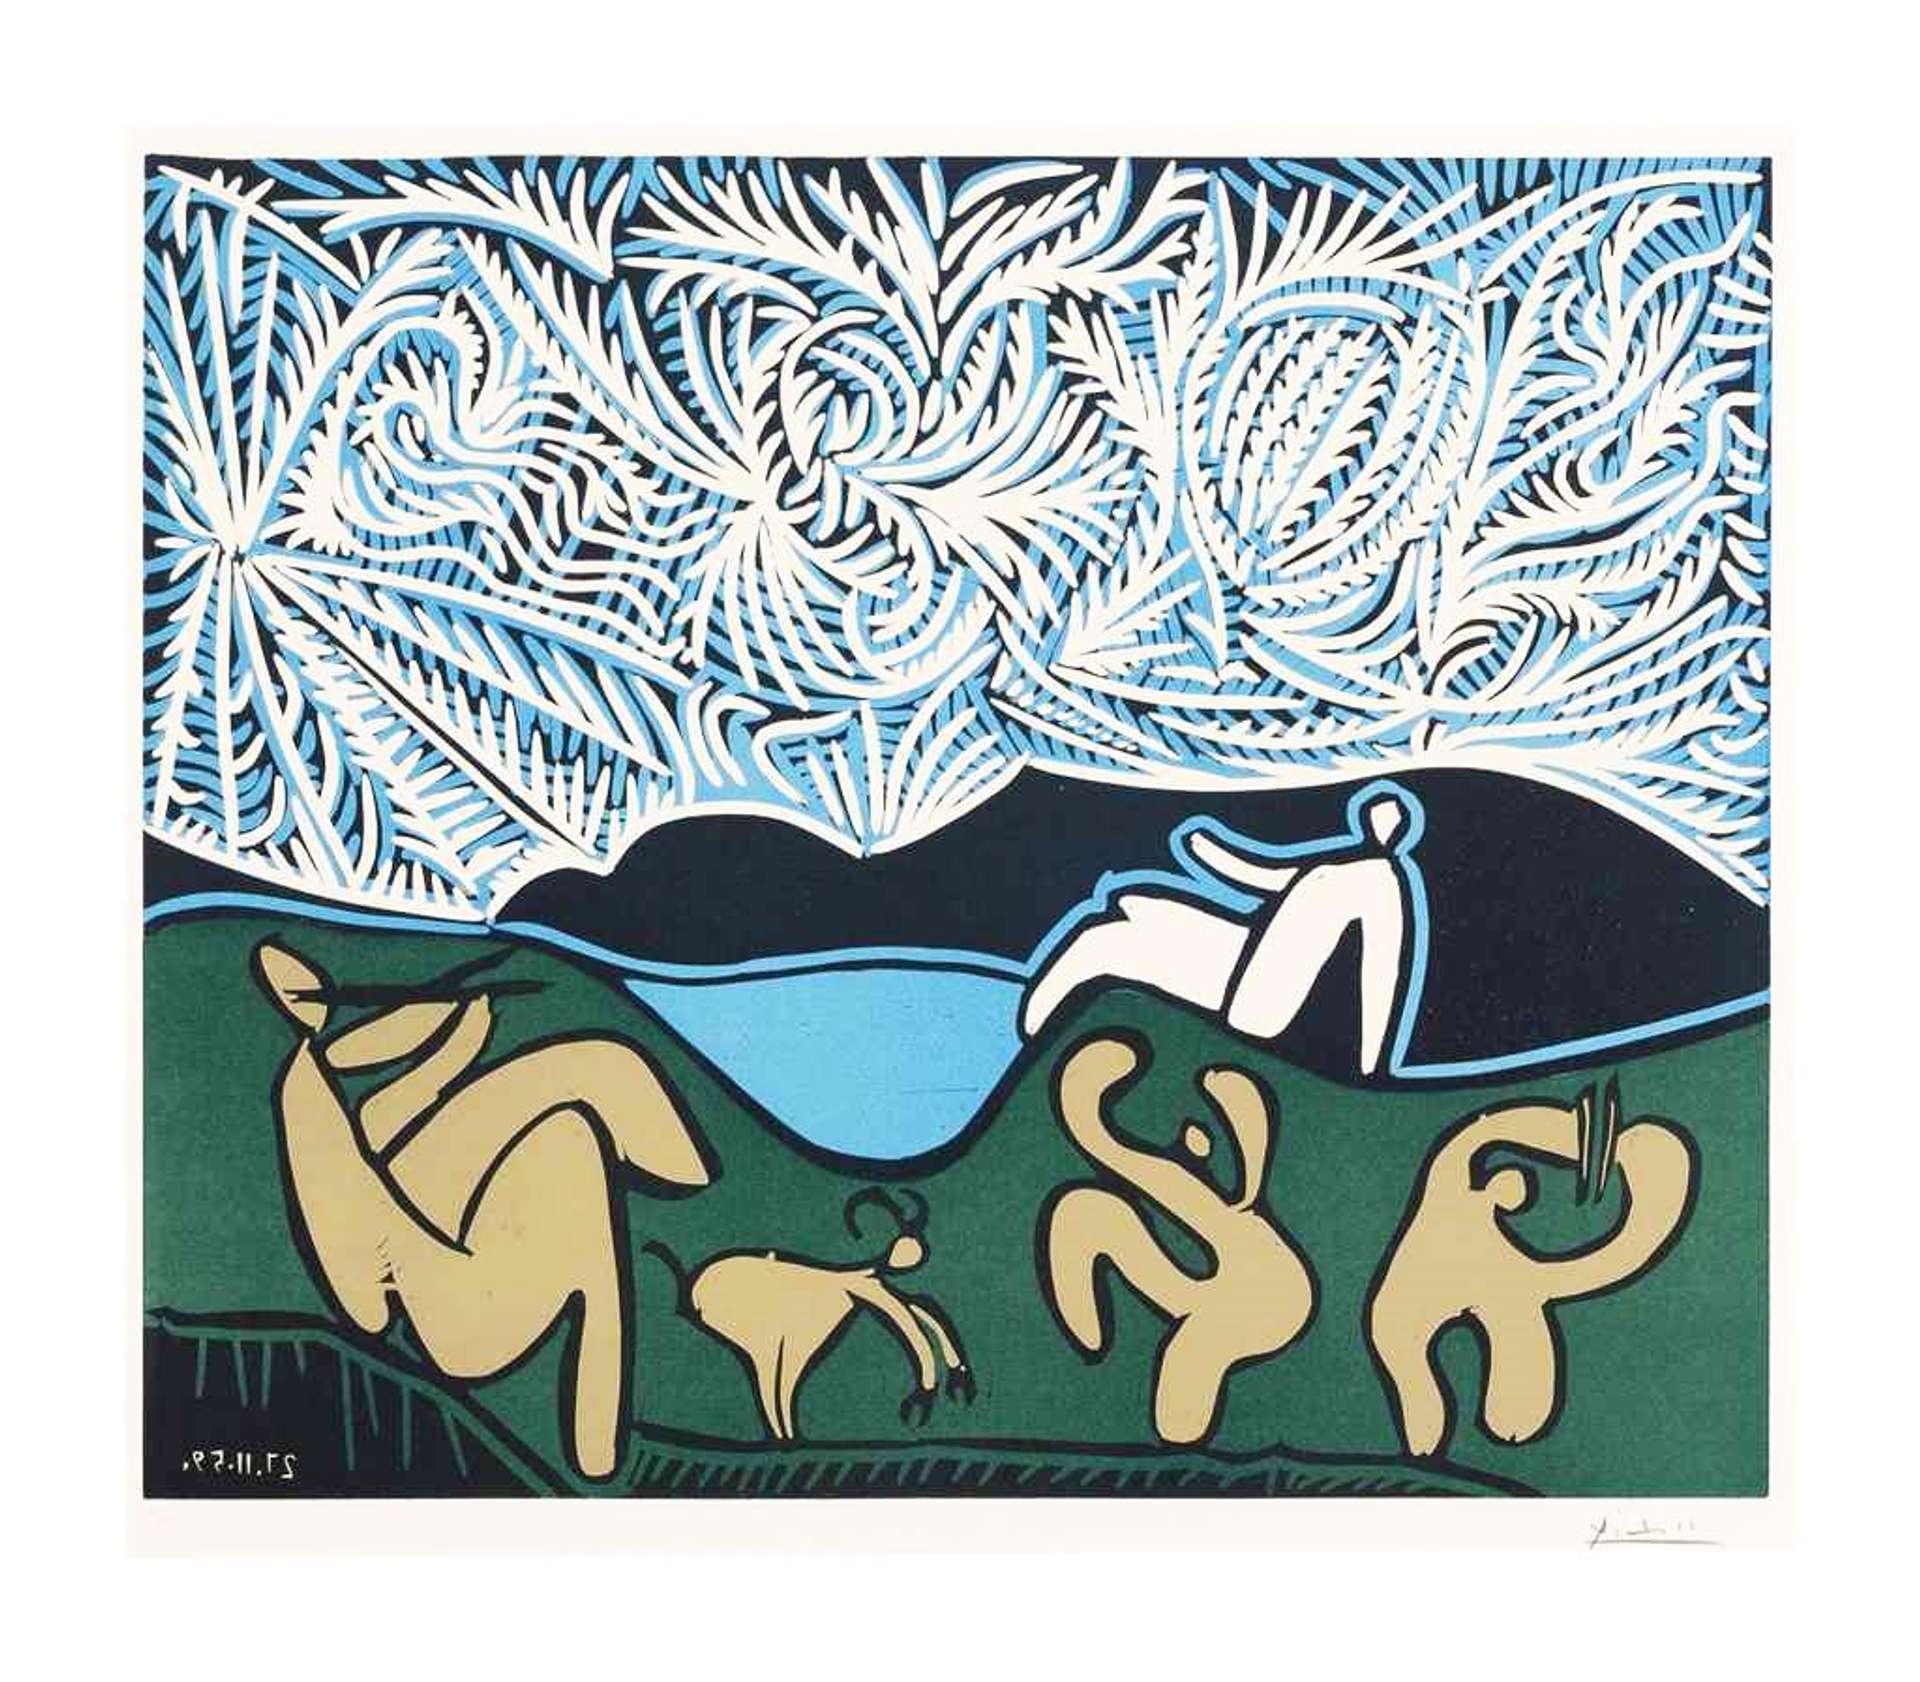 An abstract painting of human and animal figures sitting on the hills over a lake. The sky is intricately coloured with a blue and white branch-like shapes.